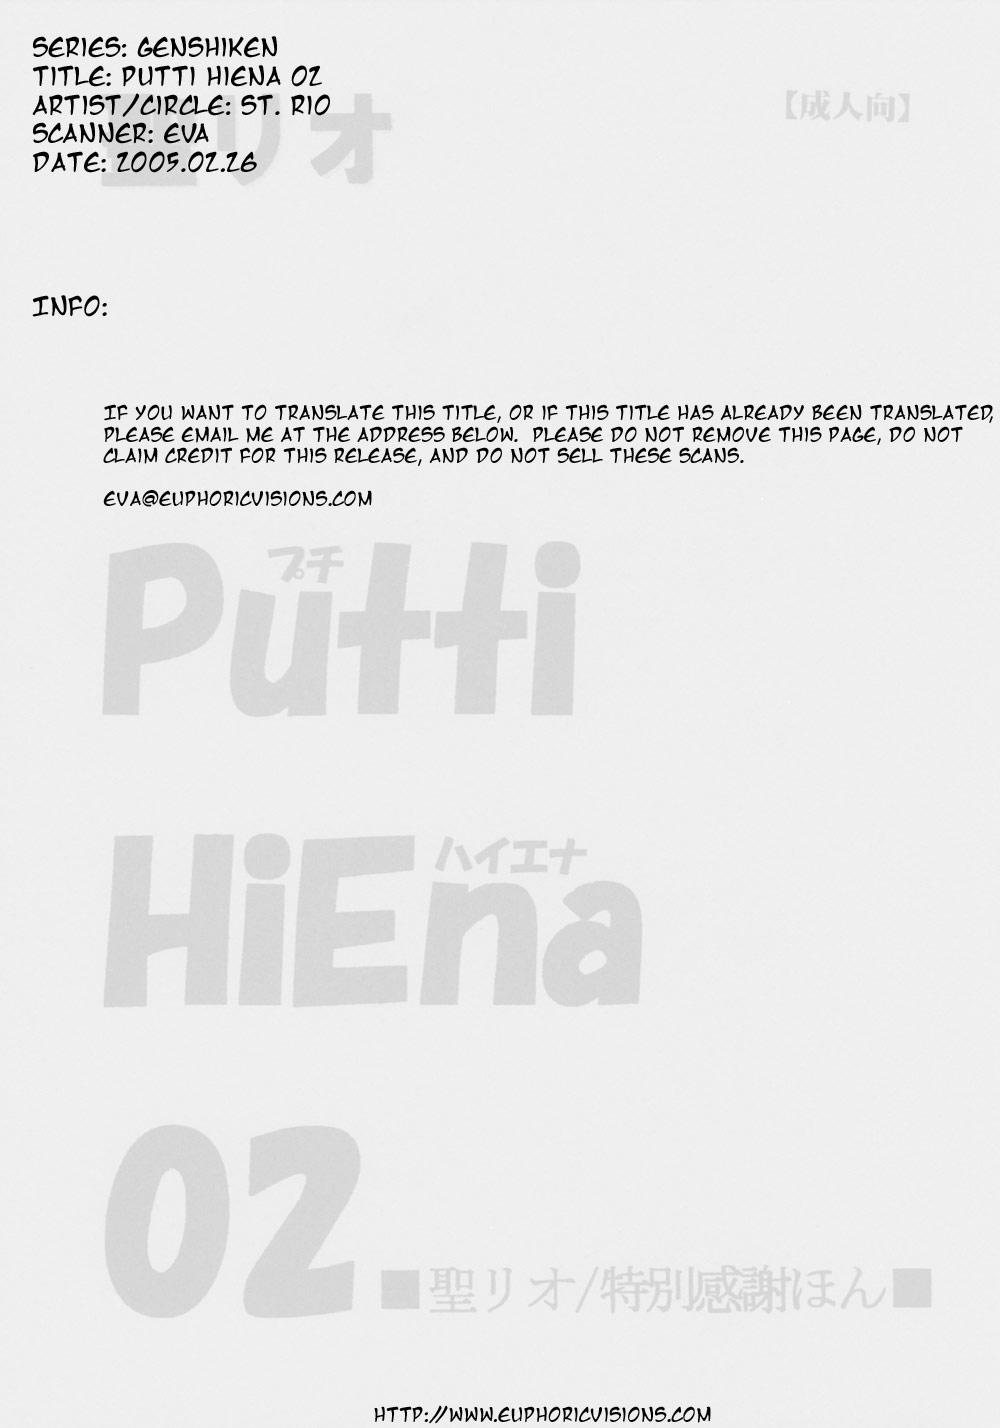 Tight Putti HiEna 02 - Genshiken Young - Page 2